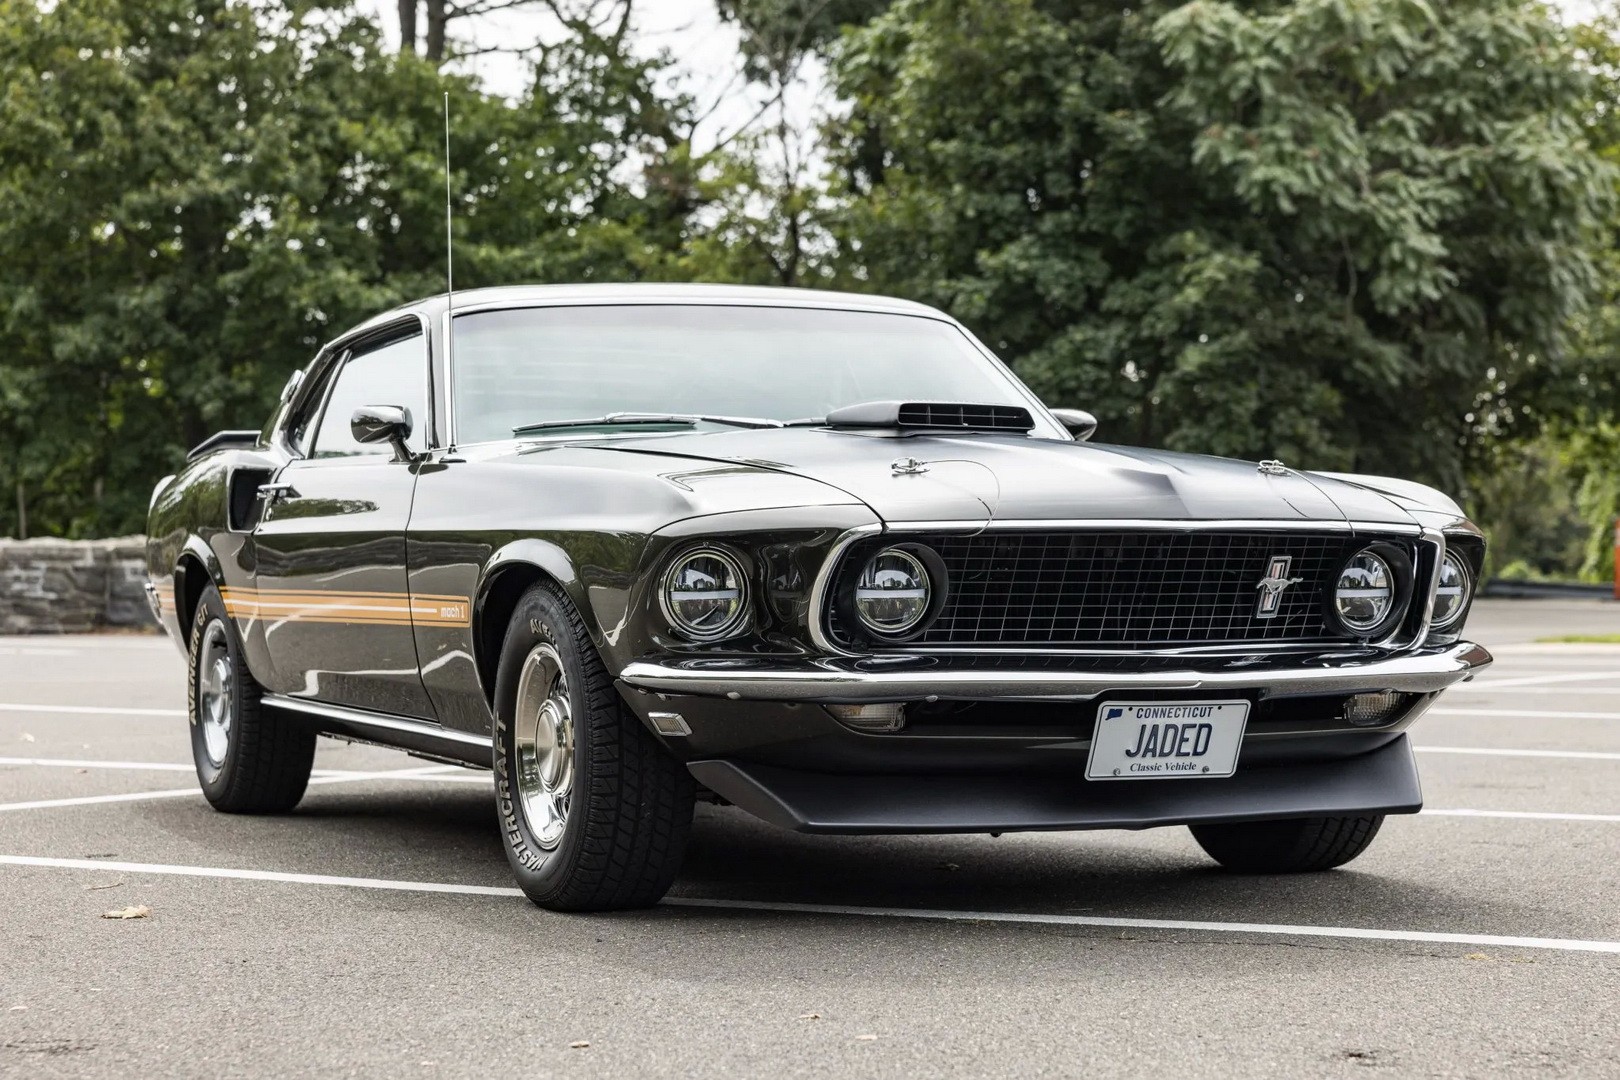 This 1969 Ford Mustang Mach 1 Once Stood Still for 20 Years, Now Looks ...